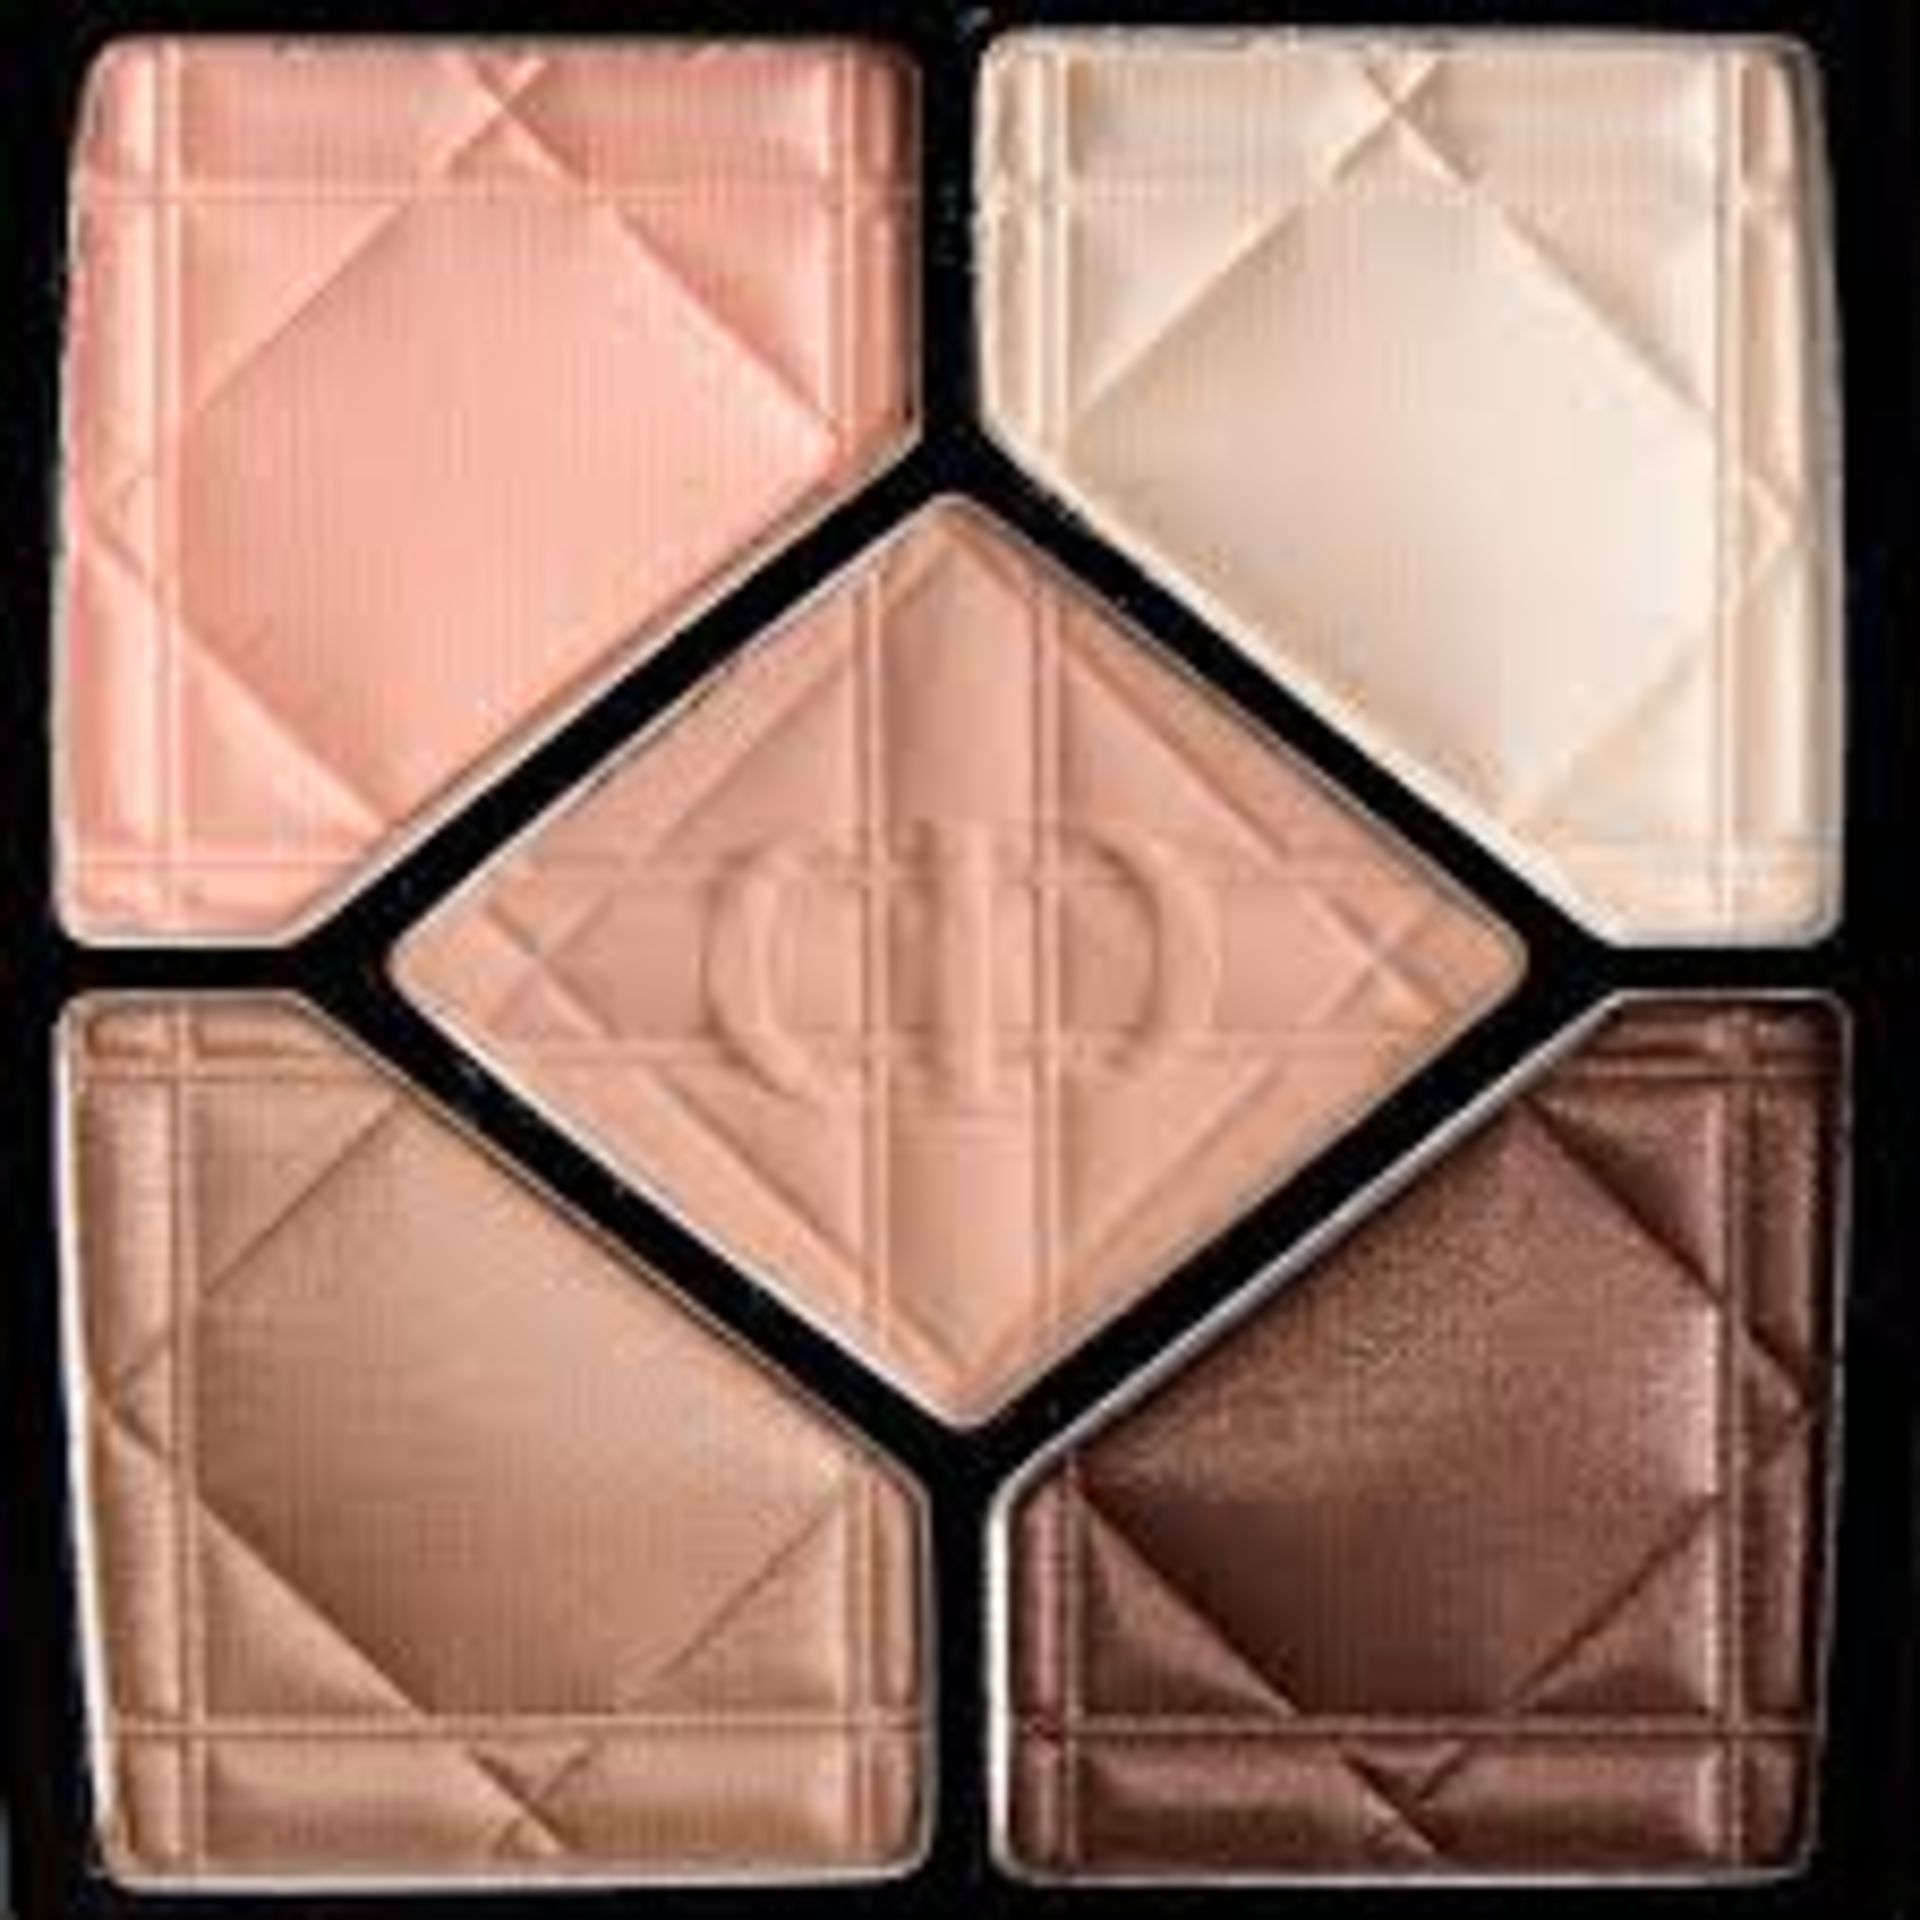 RRP £47 Dior 5 Couleurs Eyeshadow (Shade 647 Undress) (Ex Display) (Appraisals Available Upon